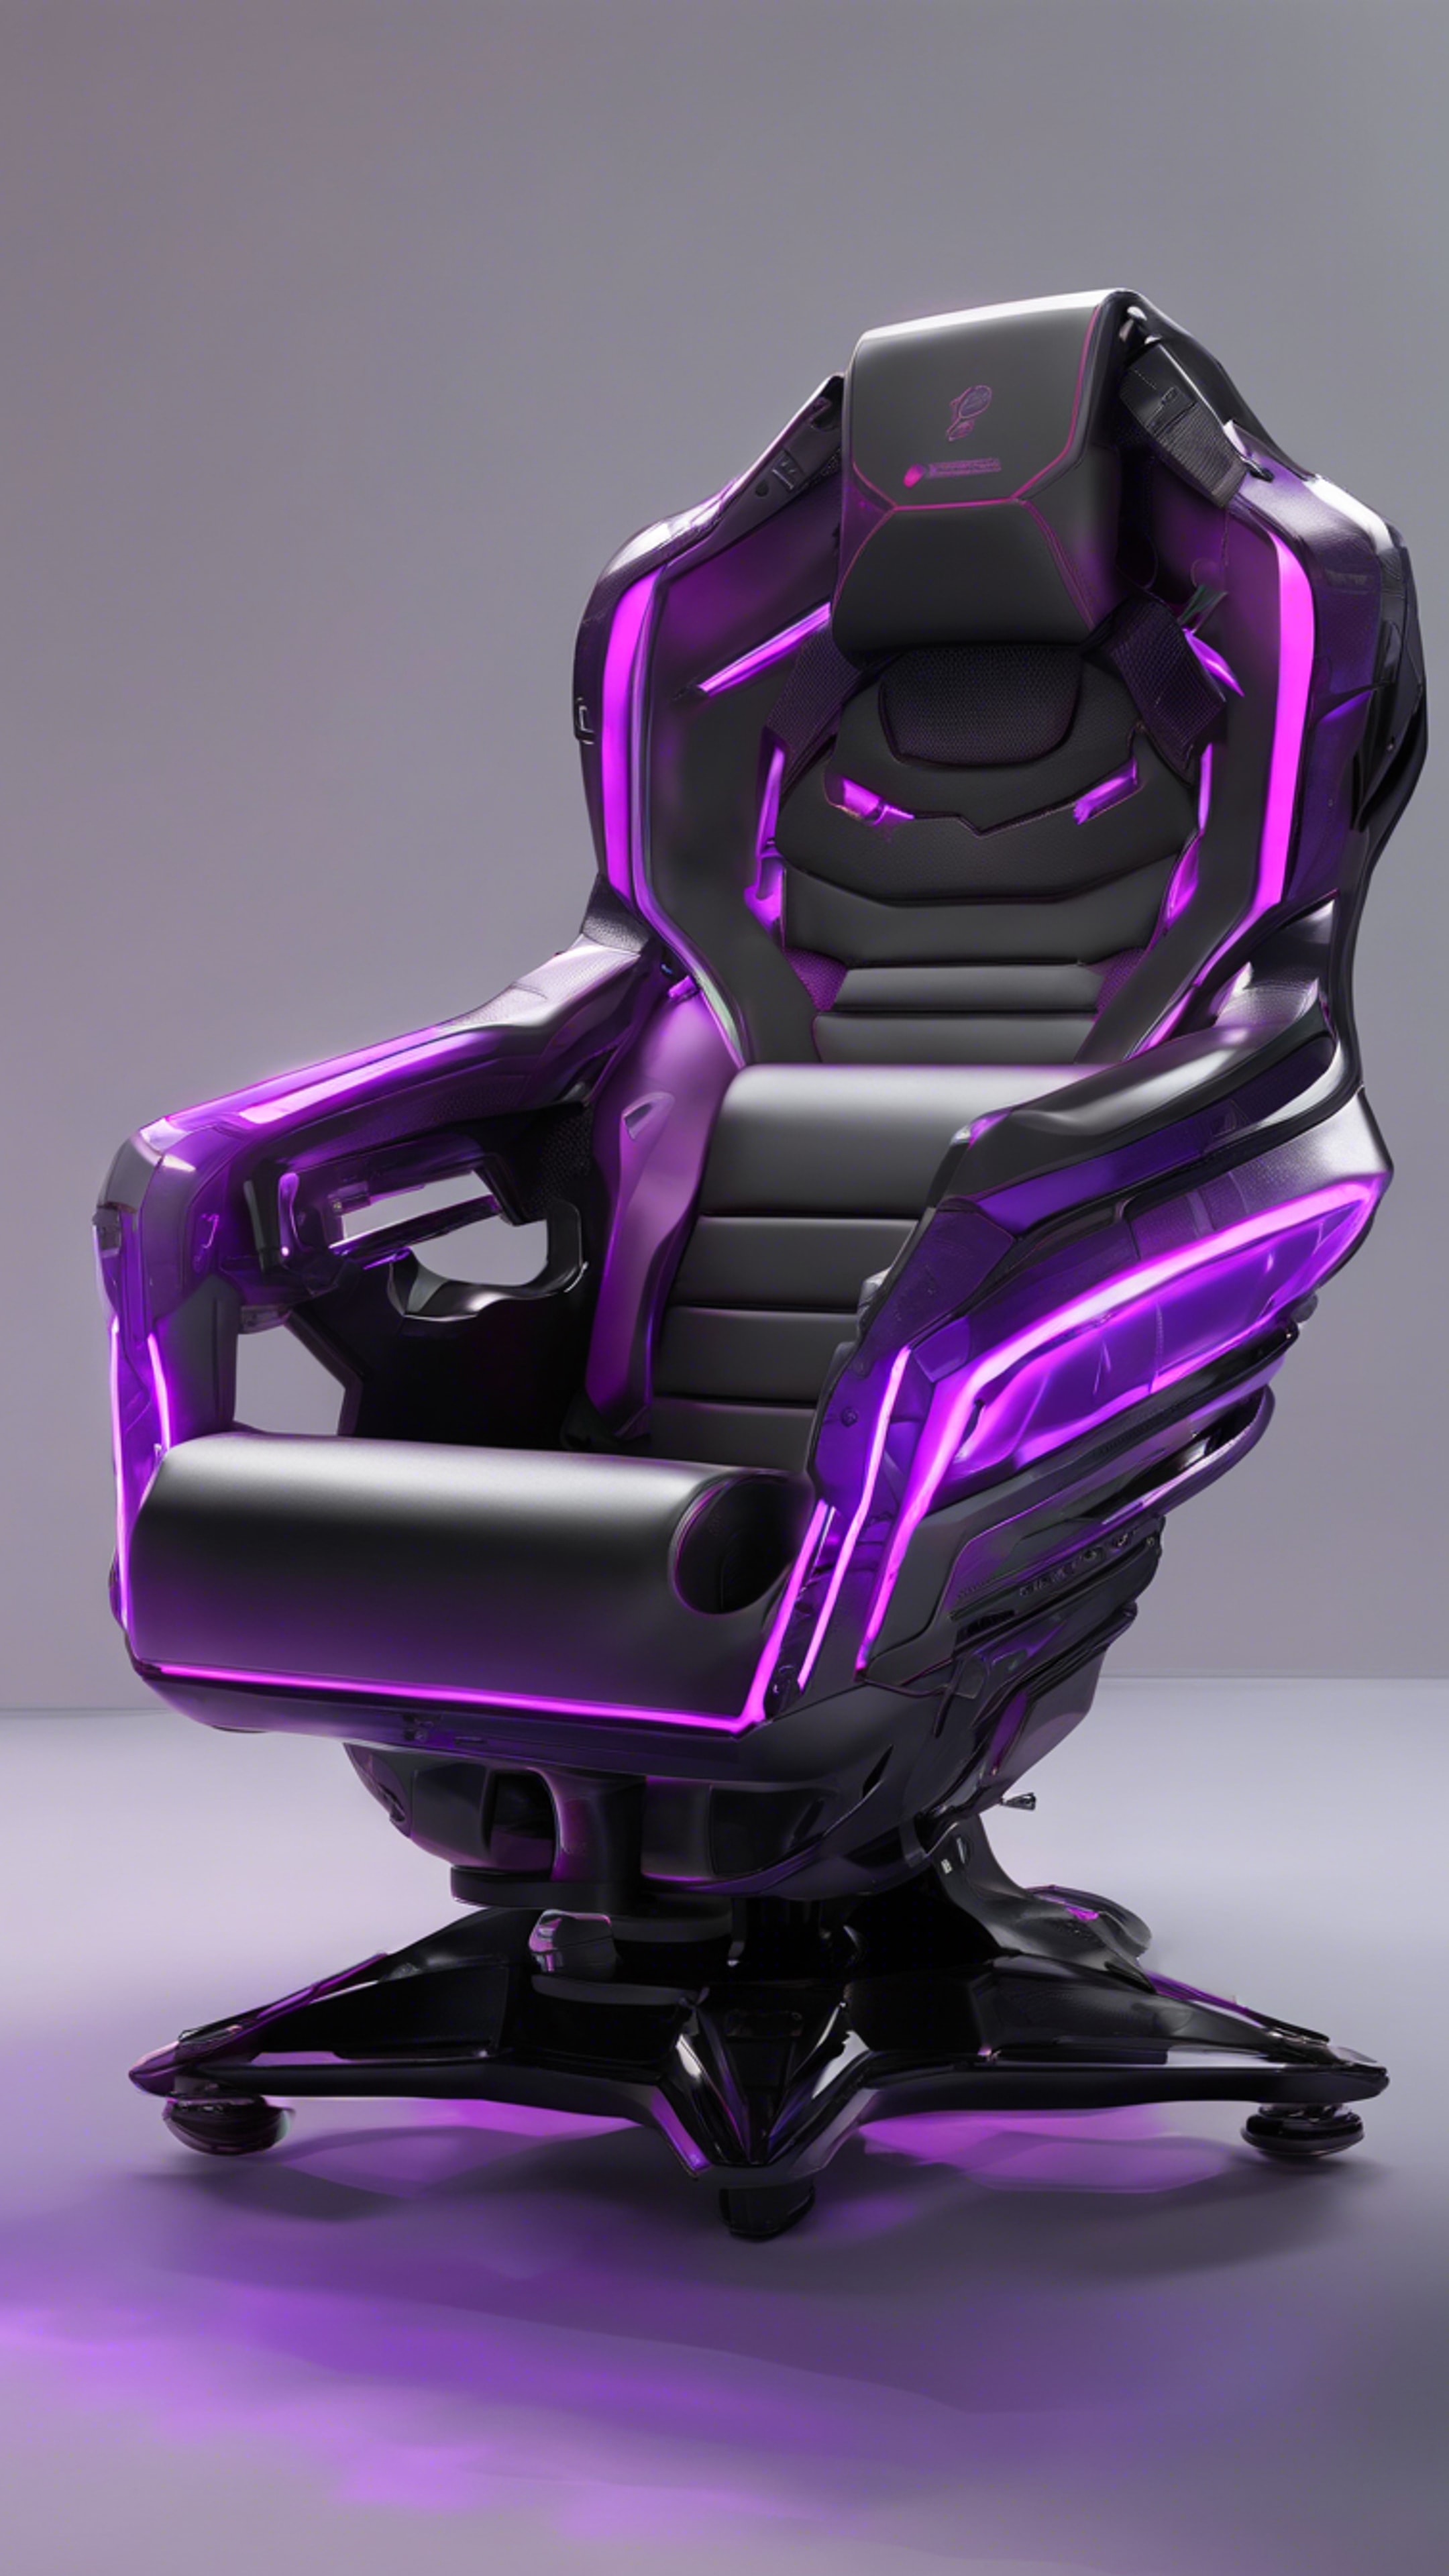 A futuristic gaming chair, jet black with neon purple accents, situated in a high-tech gaming station. Hình nền[77c4183ef08040e08e97]